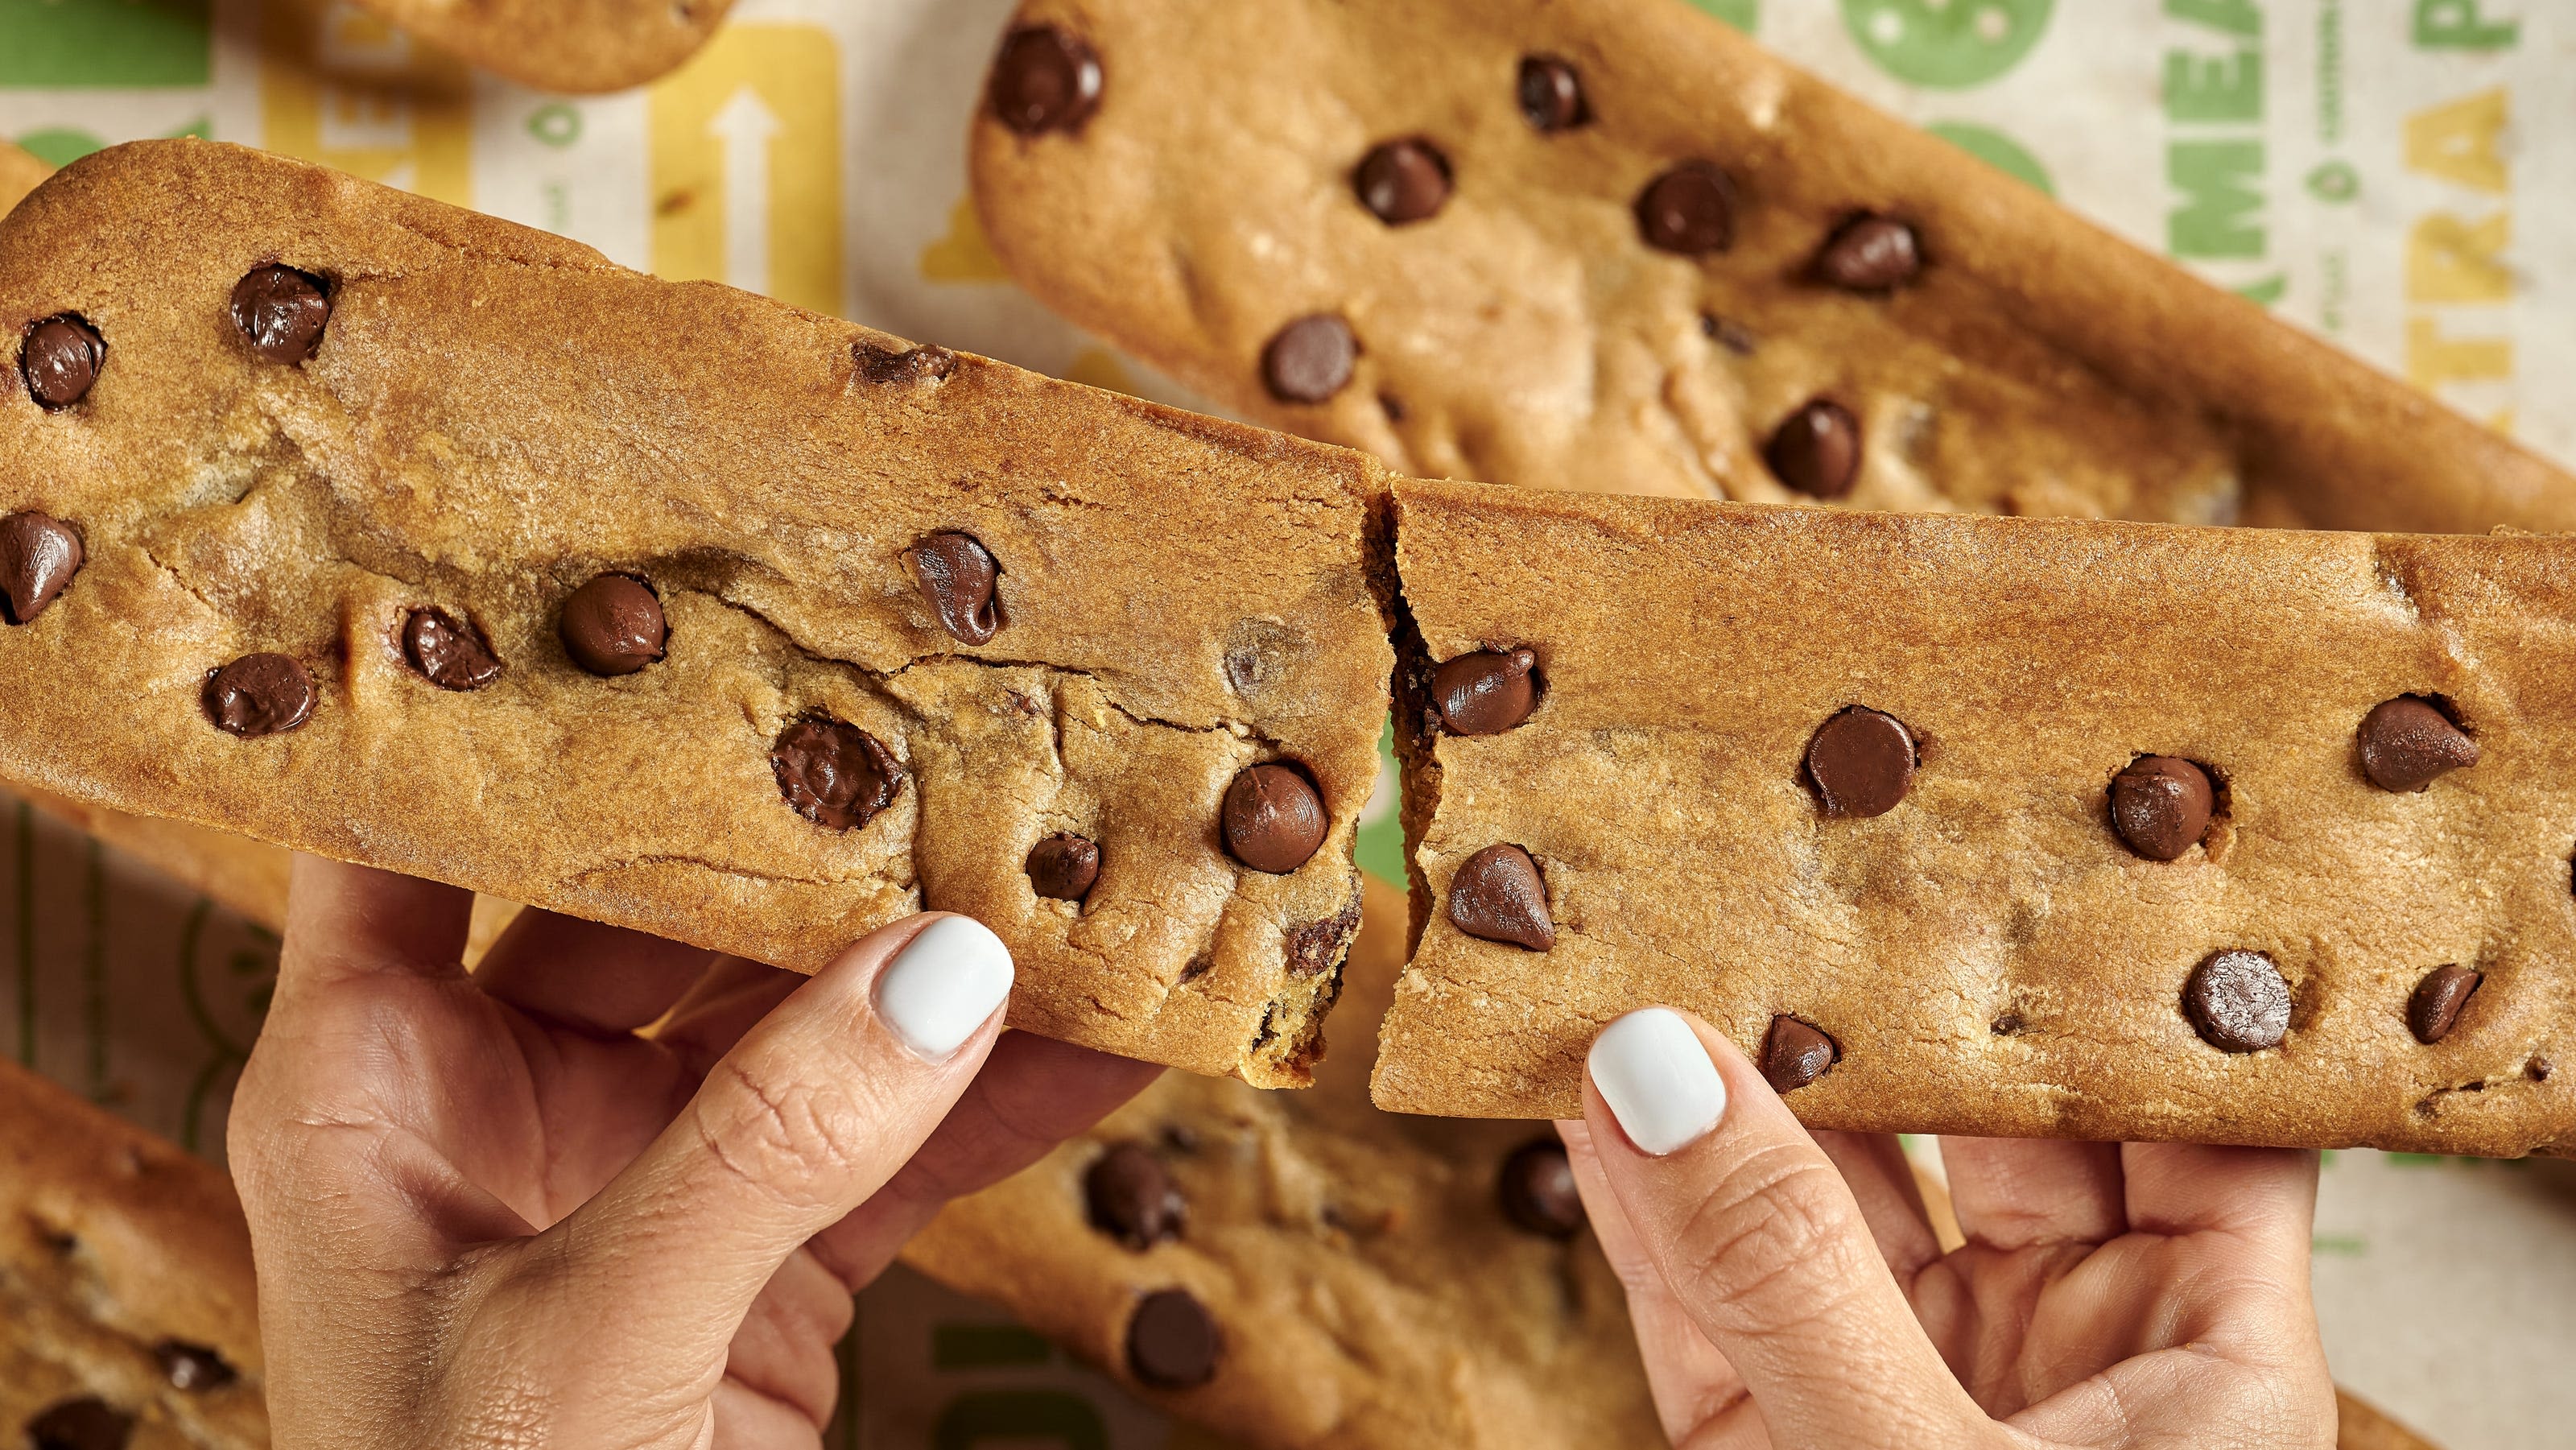 Subway's footlong cookie is returning to menus after demand from customers: What to know